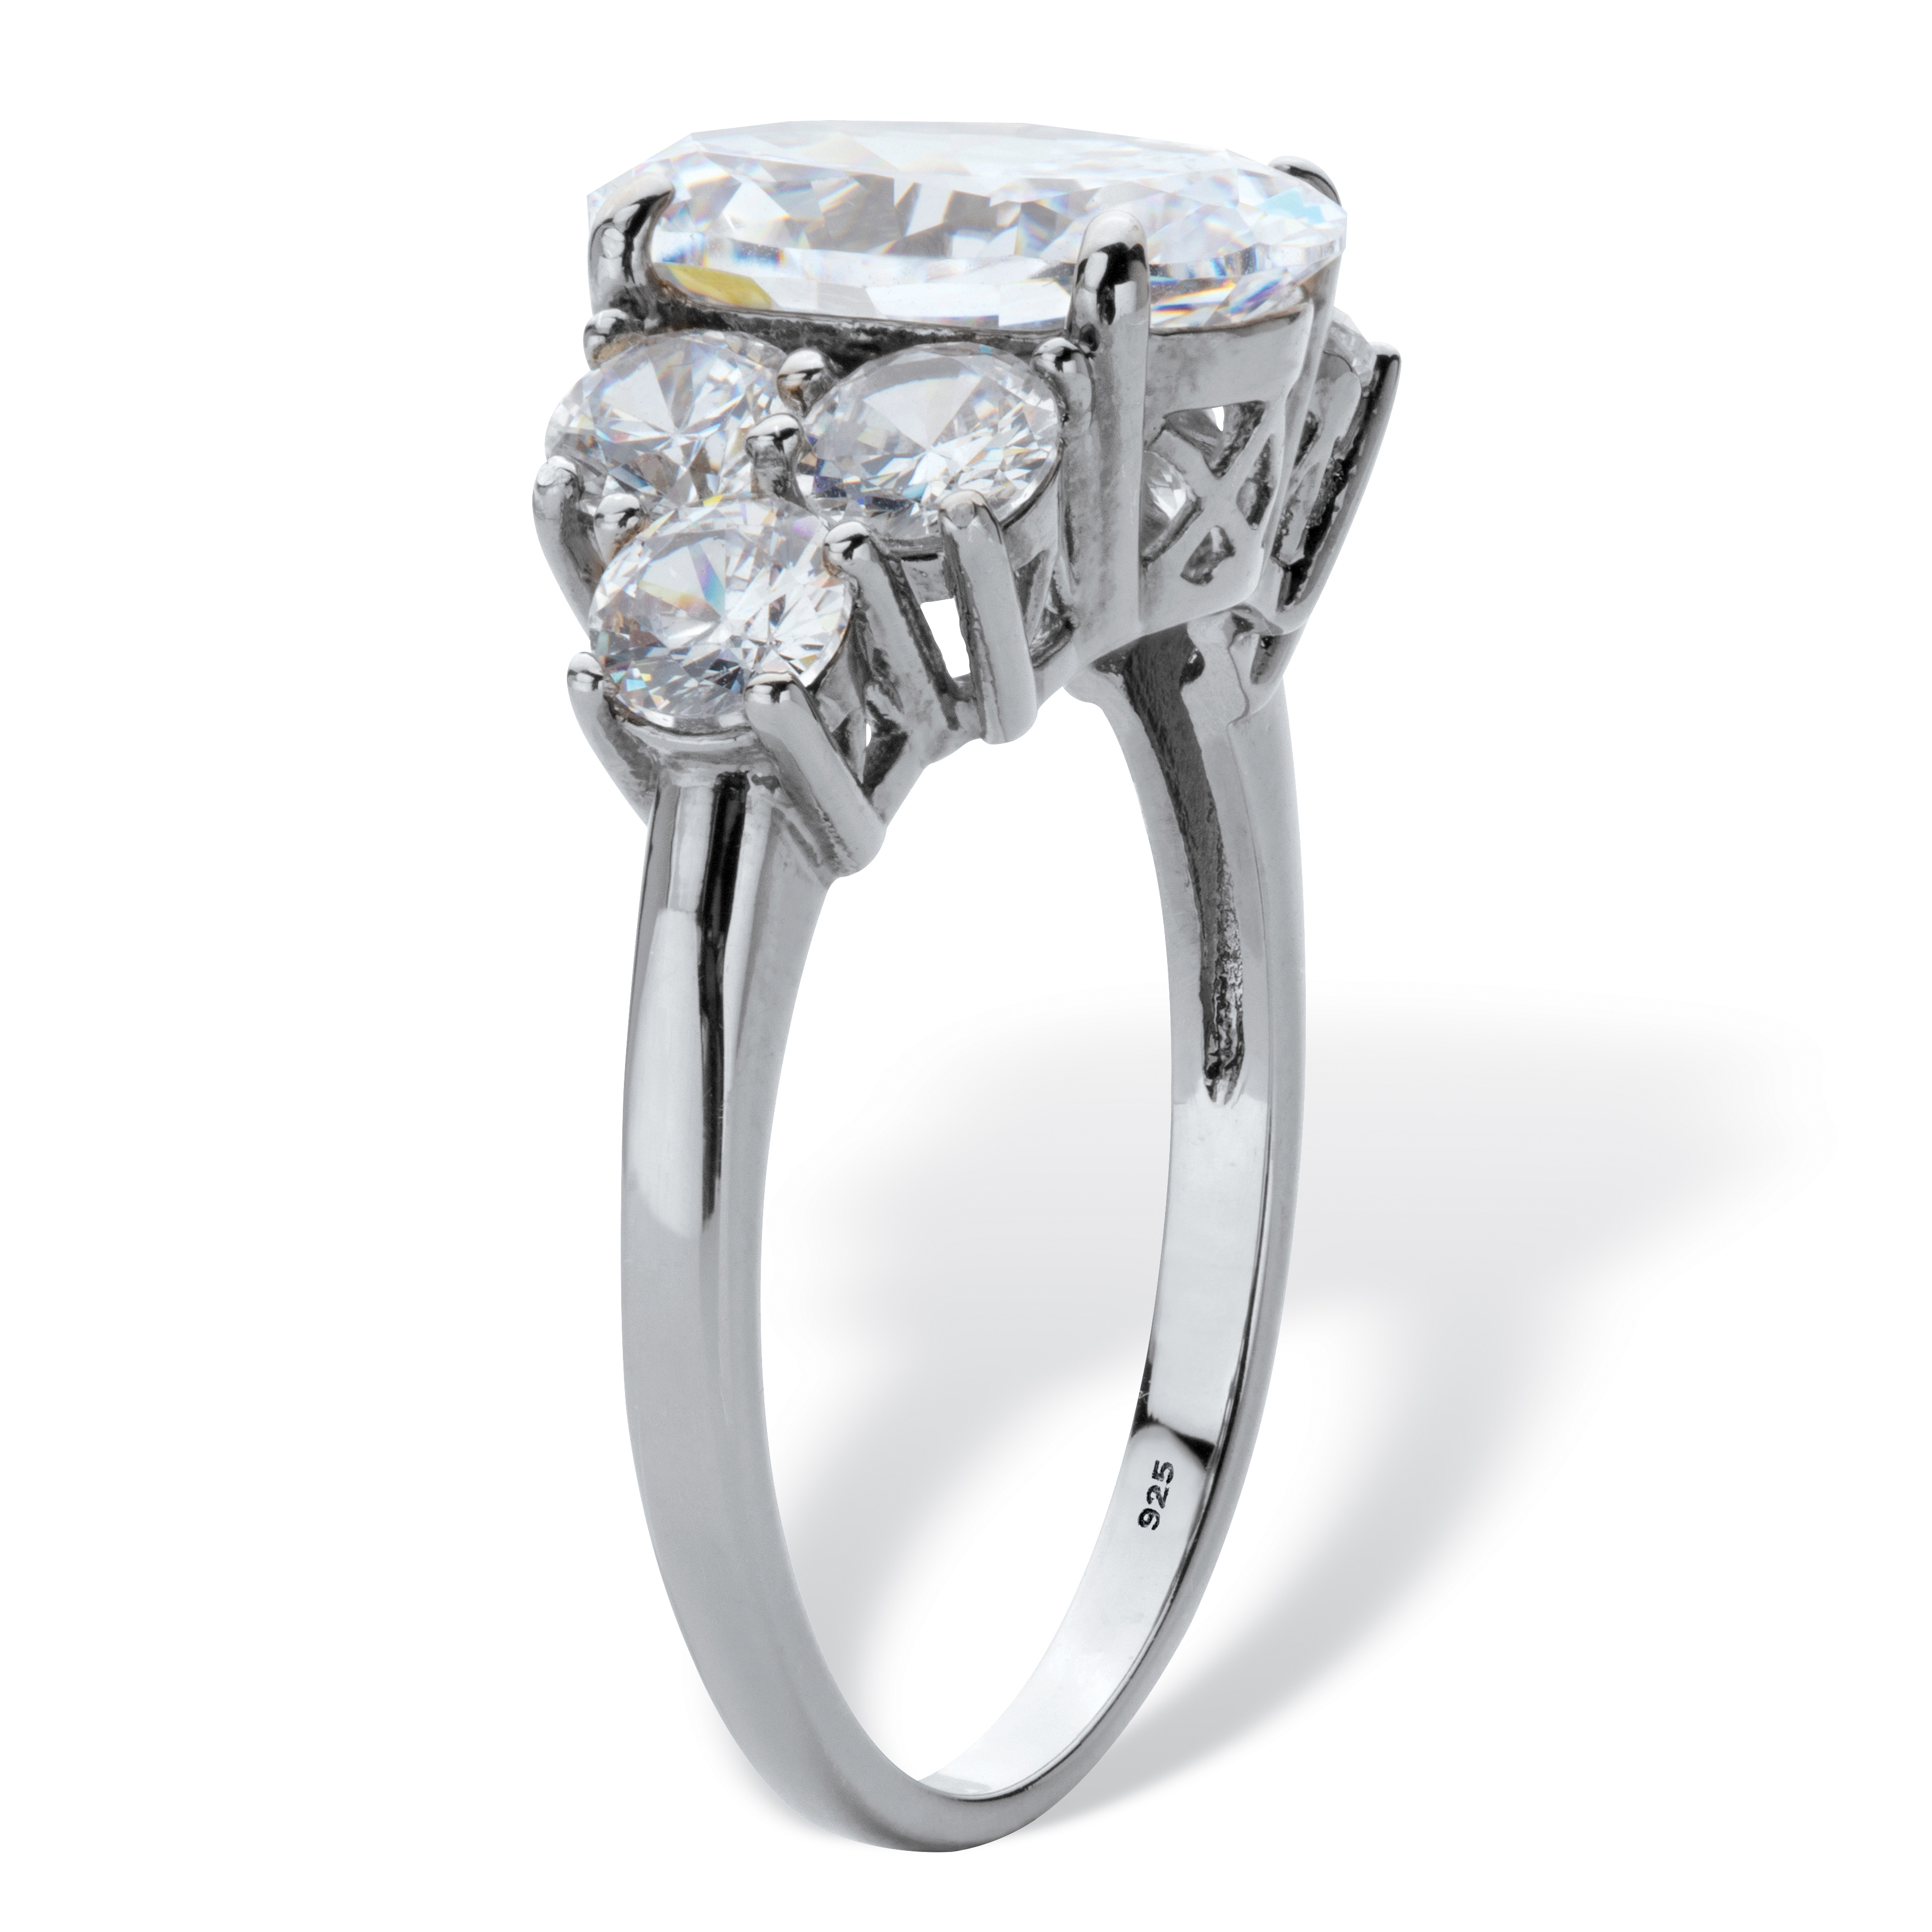 Details about   9.49 TCW Oval-Cut CZ Halo Ring in Platinum over .925 Silver 